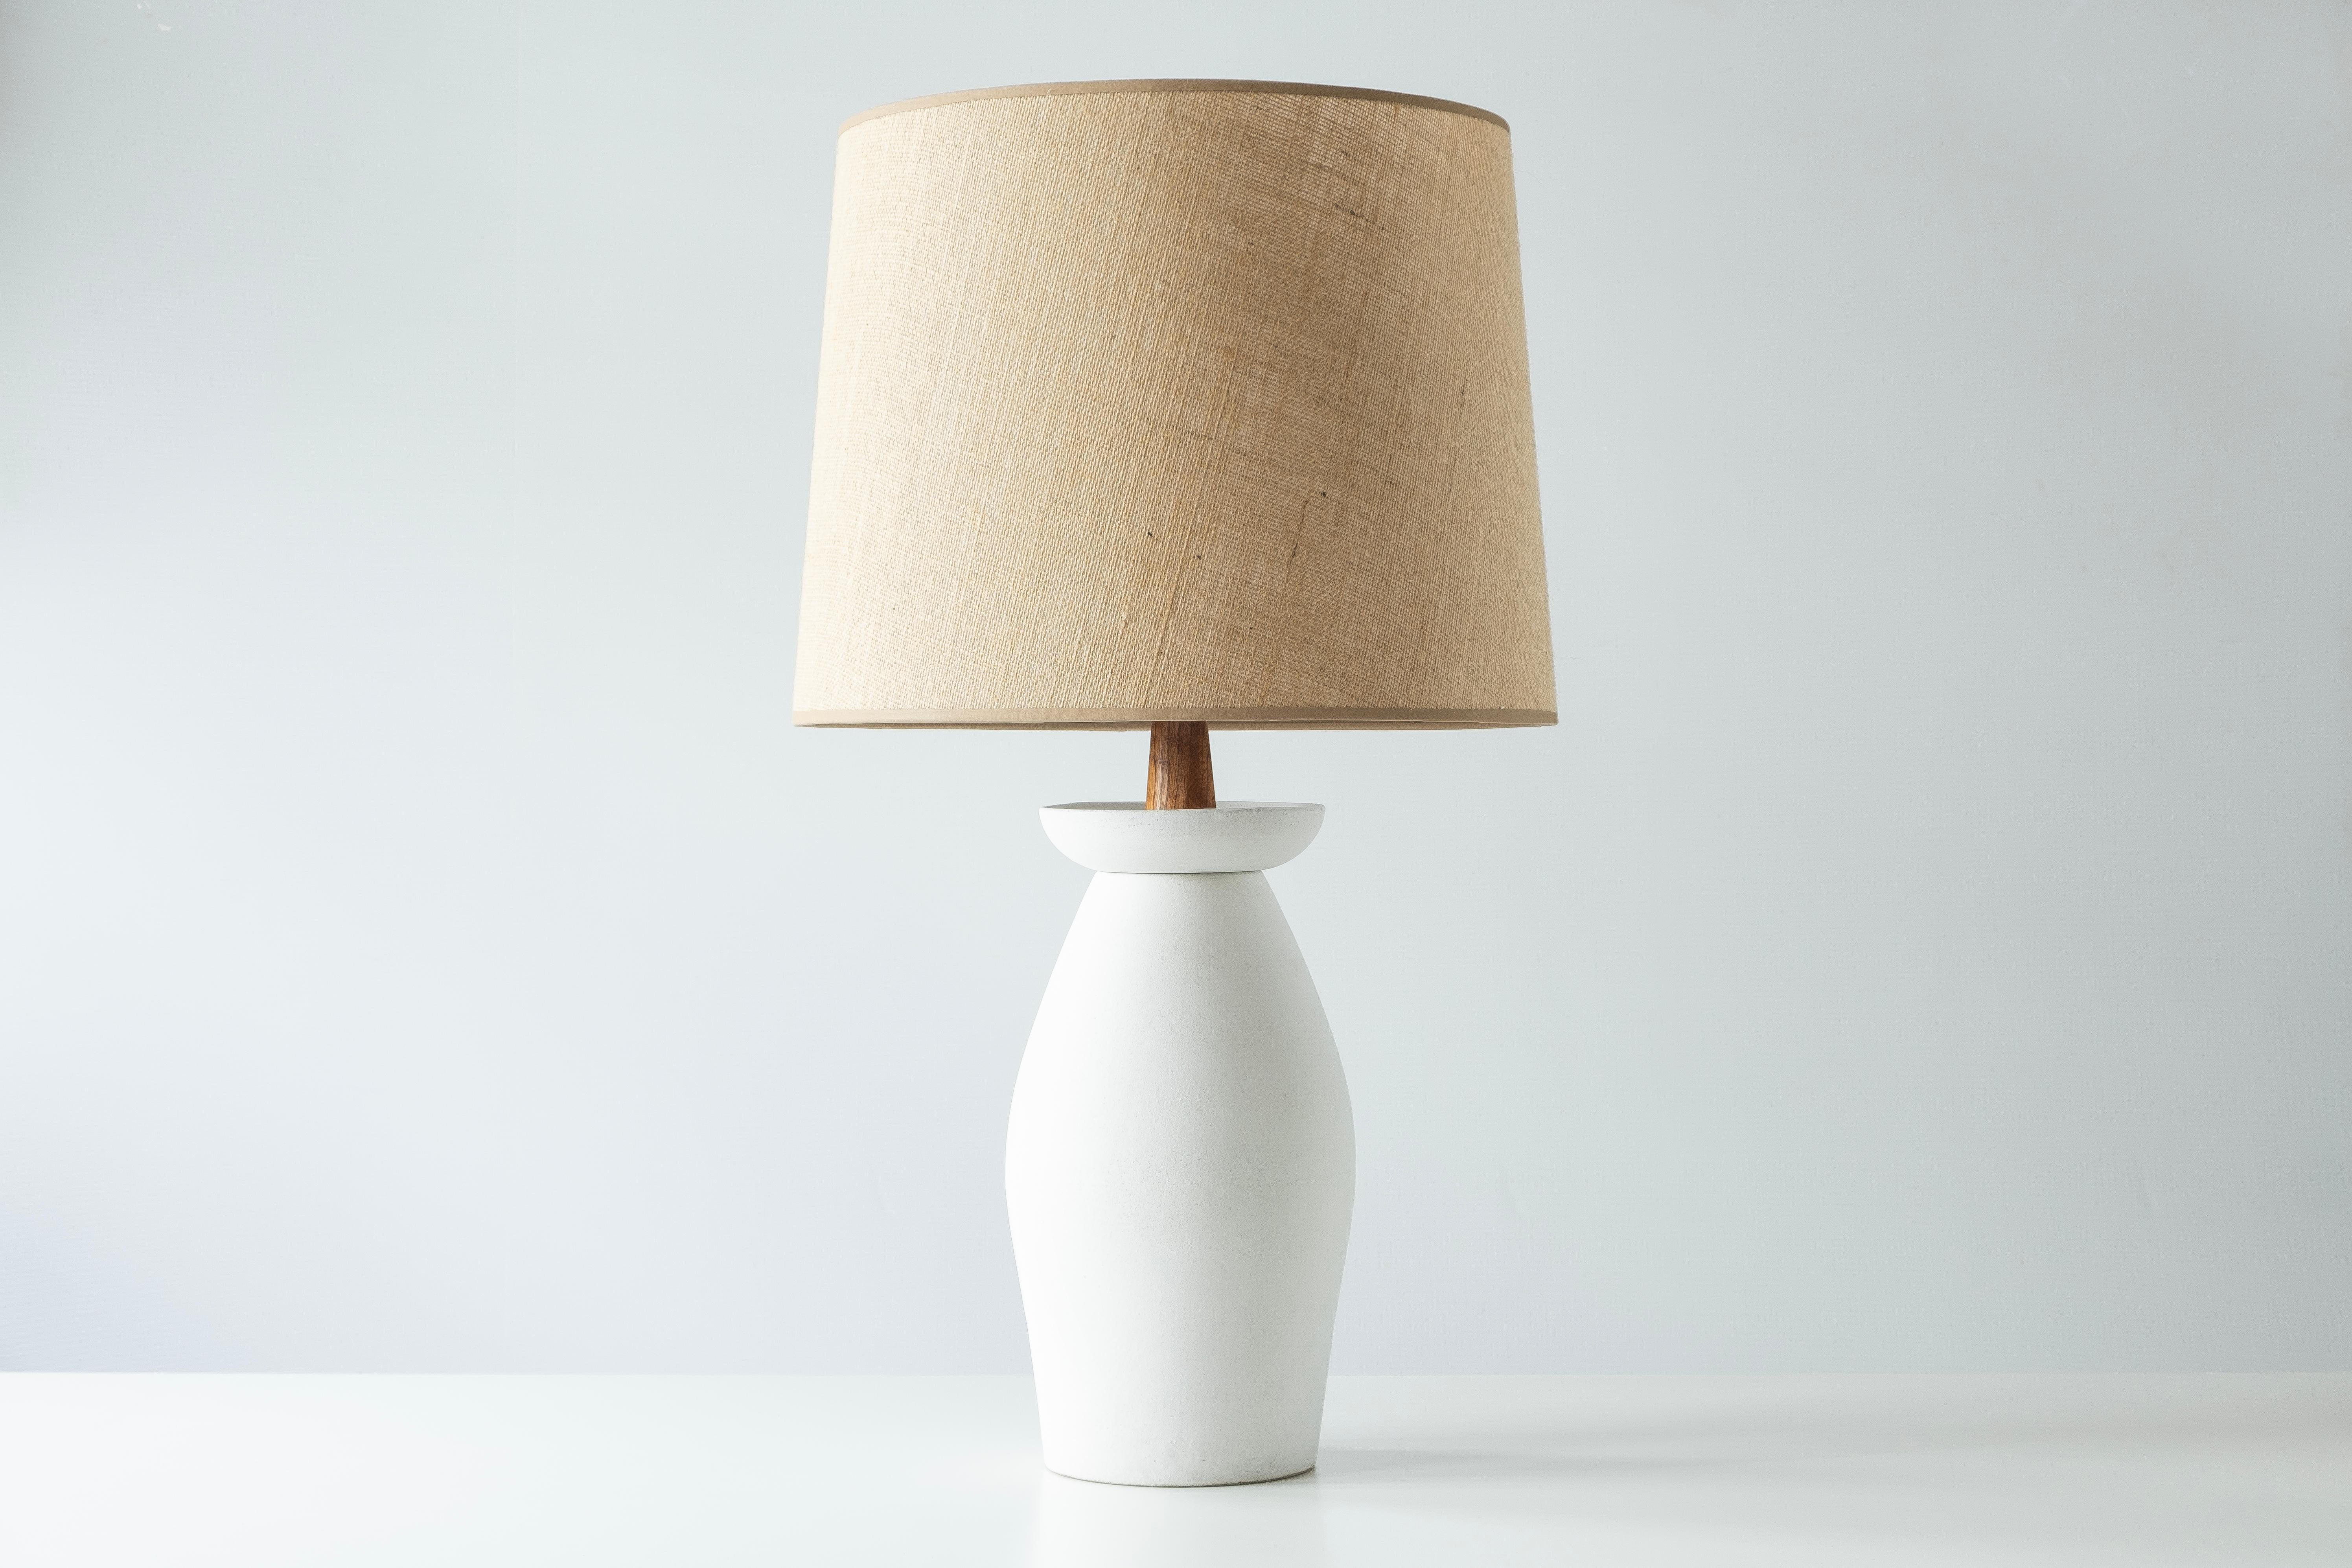 ?? What is it?
—
This signed Martz Model 167 lamp comes in a matte, unglazed white base. This model was slipcast then painted with a white slip, giving the lamp its bright white color. A rounded base is topped with an upturned collar that houses a